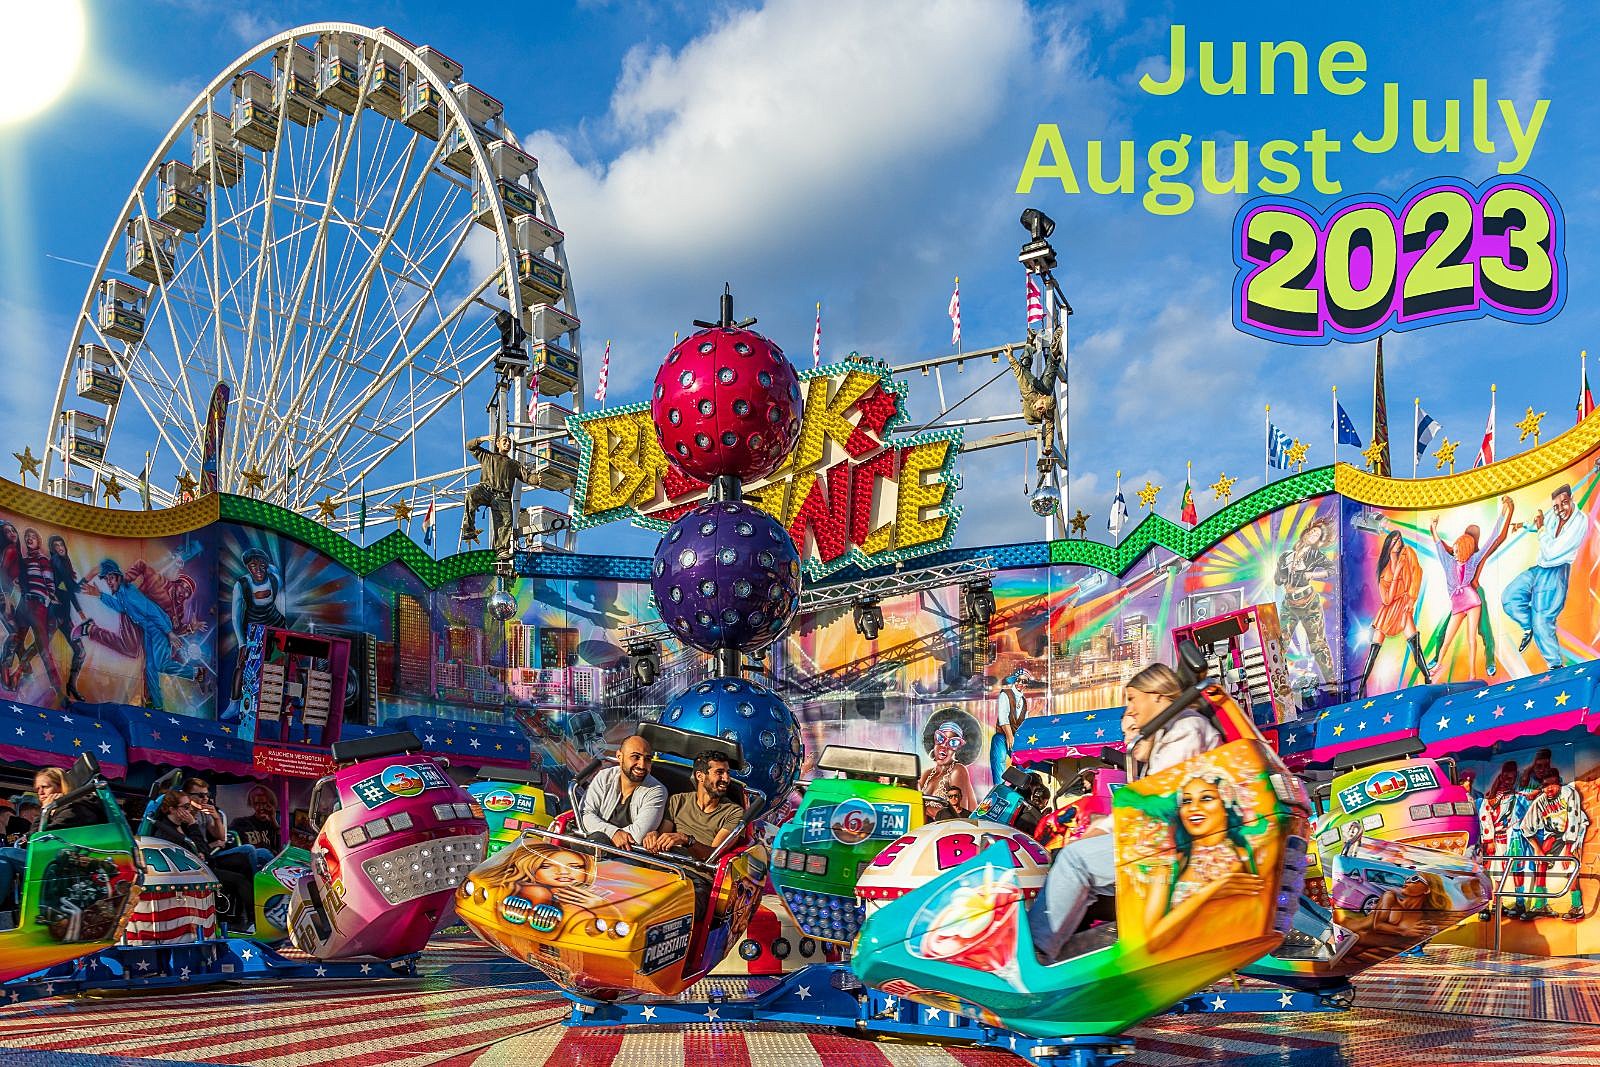 Fairs & Festivals  Sussex County, New Jersey